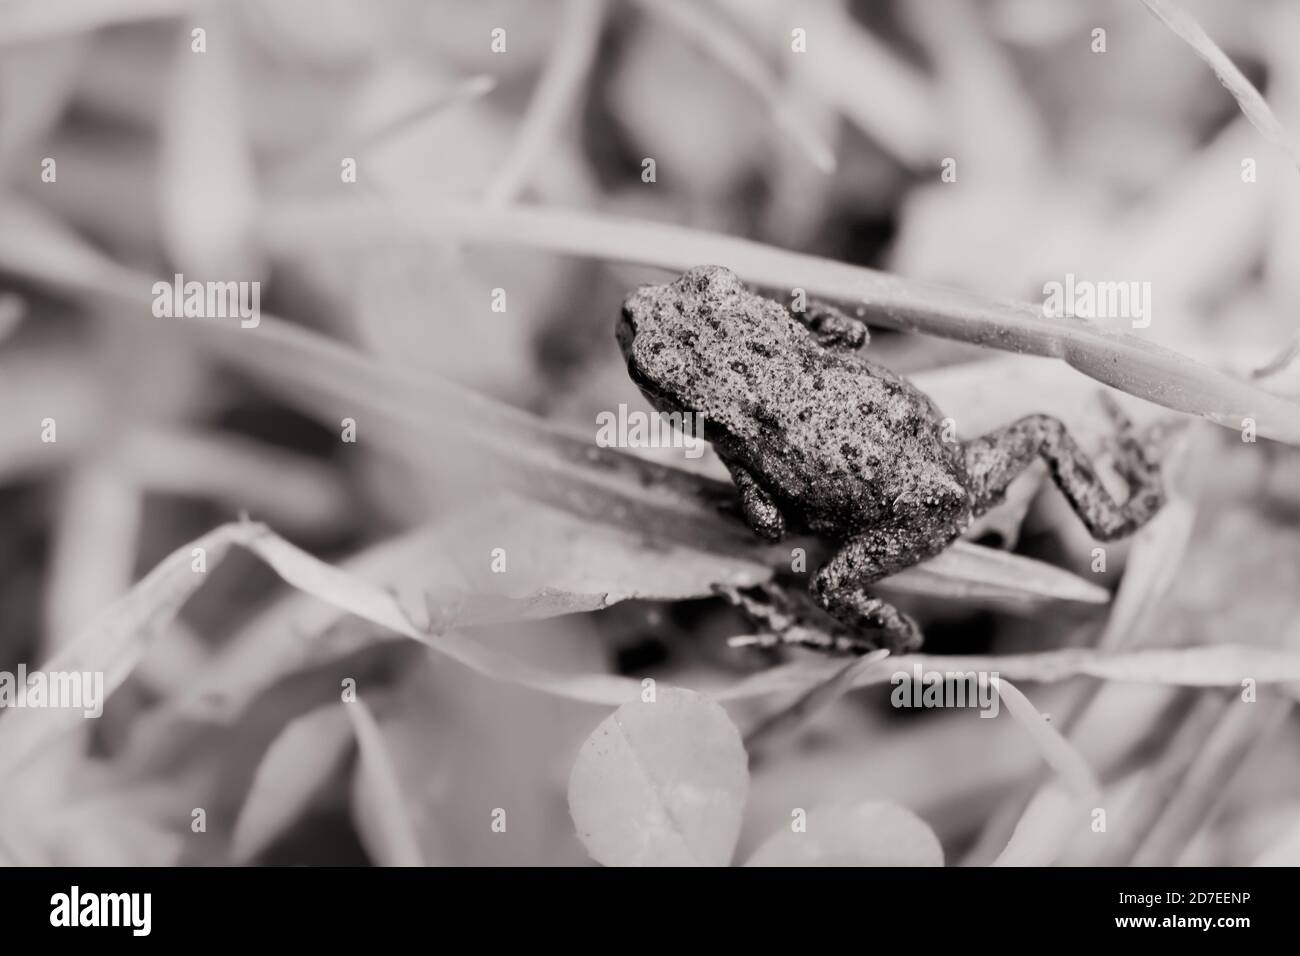 A small juvenile common toad in grass Stock Photo